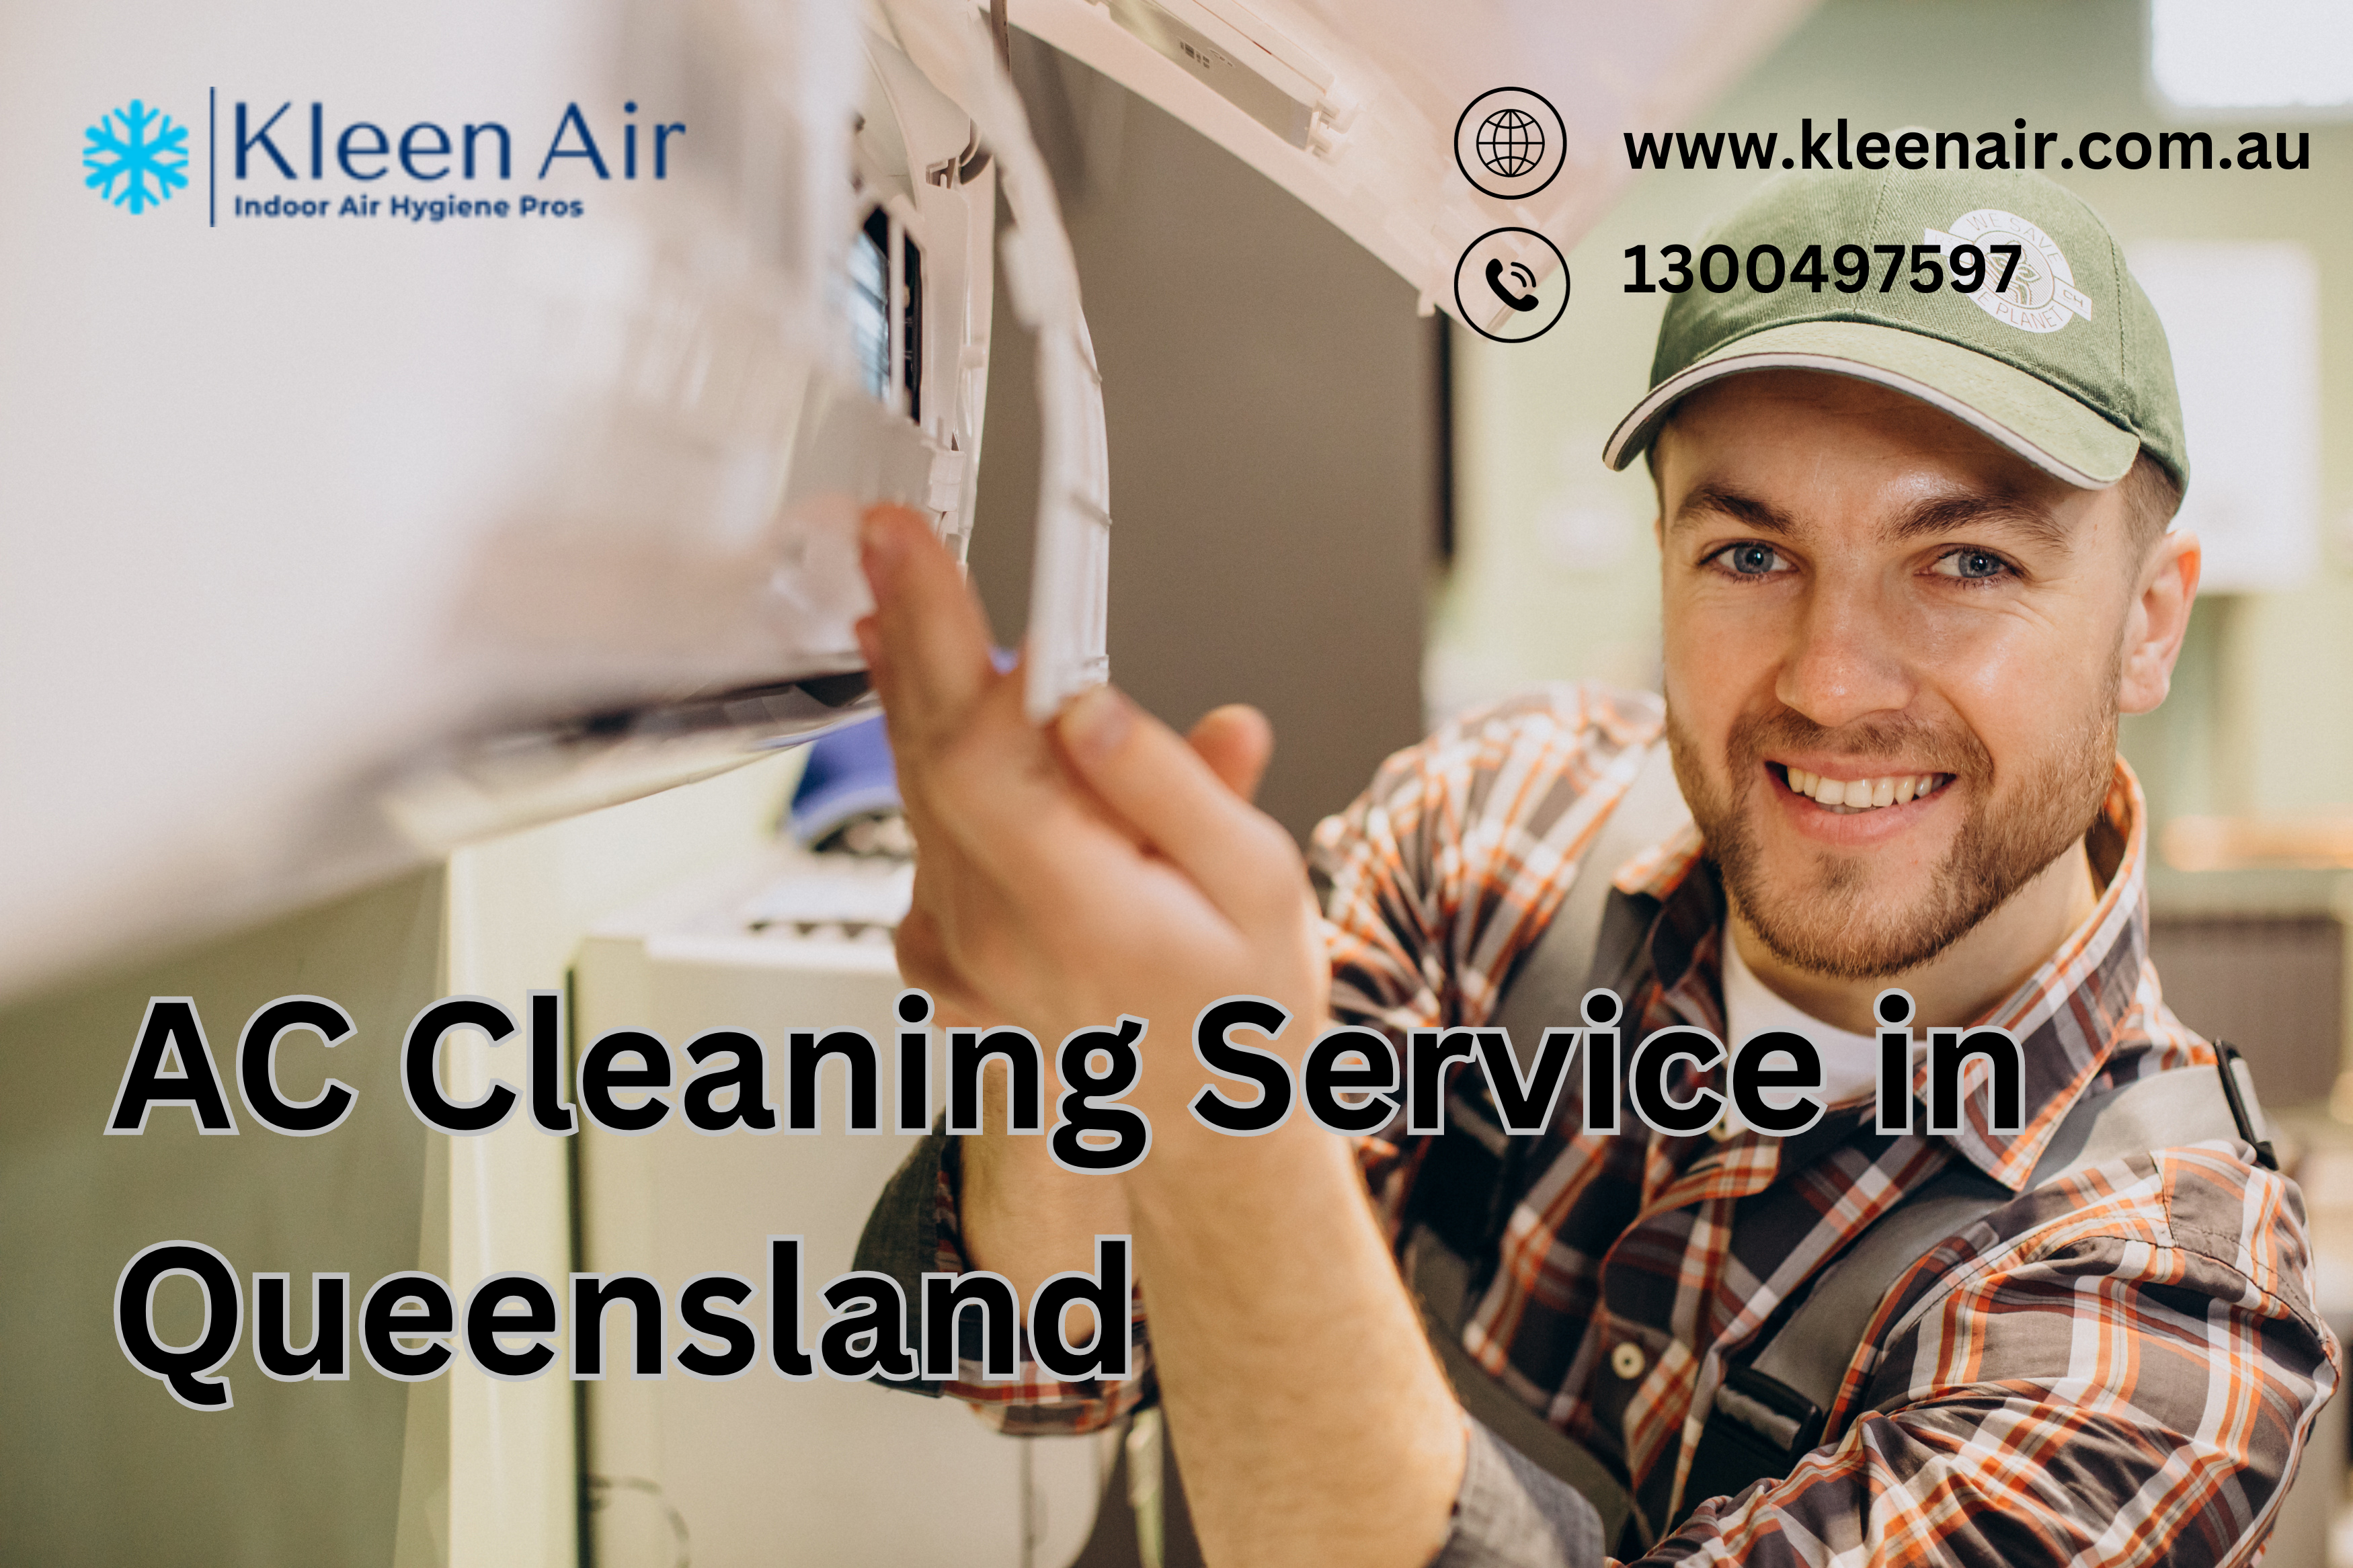 AC Cleaning Service in Queensland